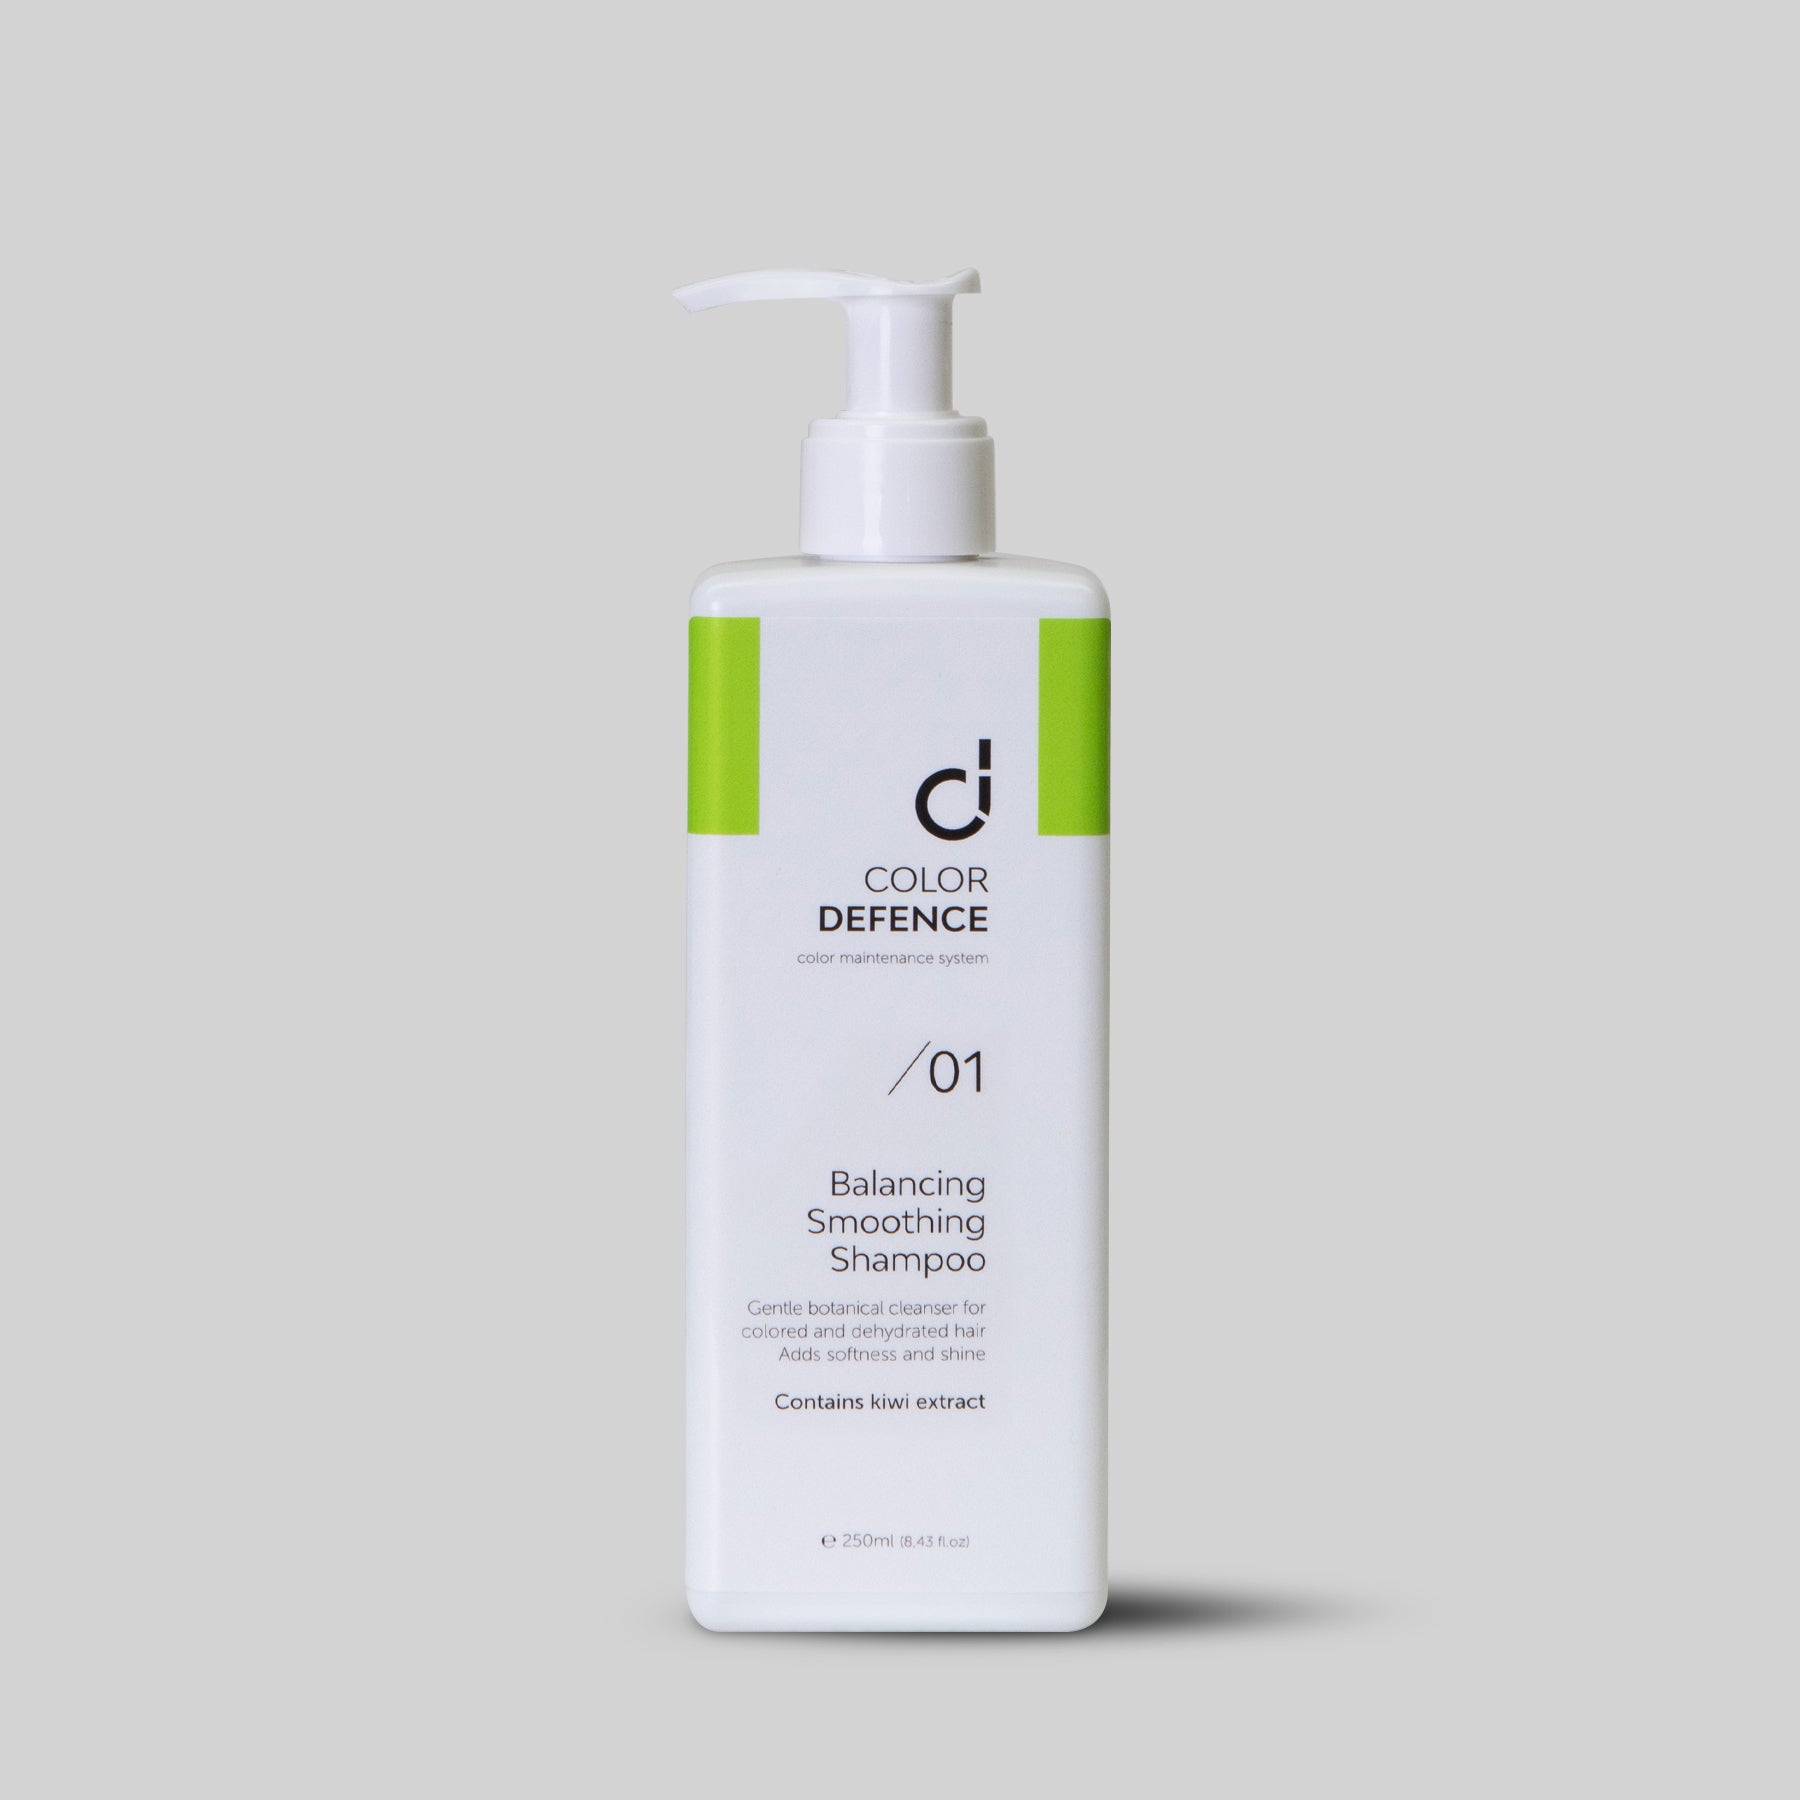 Balancing Smoothing Shampoo - Cleanses and prepares hair for our 3 step colour maintenance system. A gentle daily shampoo for dehydrated, coloured hair. Reduces oxidation, protects against free radical and environmental damage. A gentle botanical cleanser that adds body and shine. Contains Vitamin E & Kiwi extract.1234